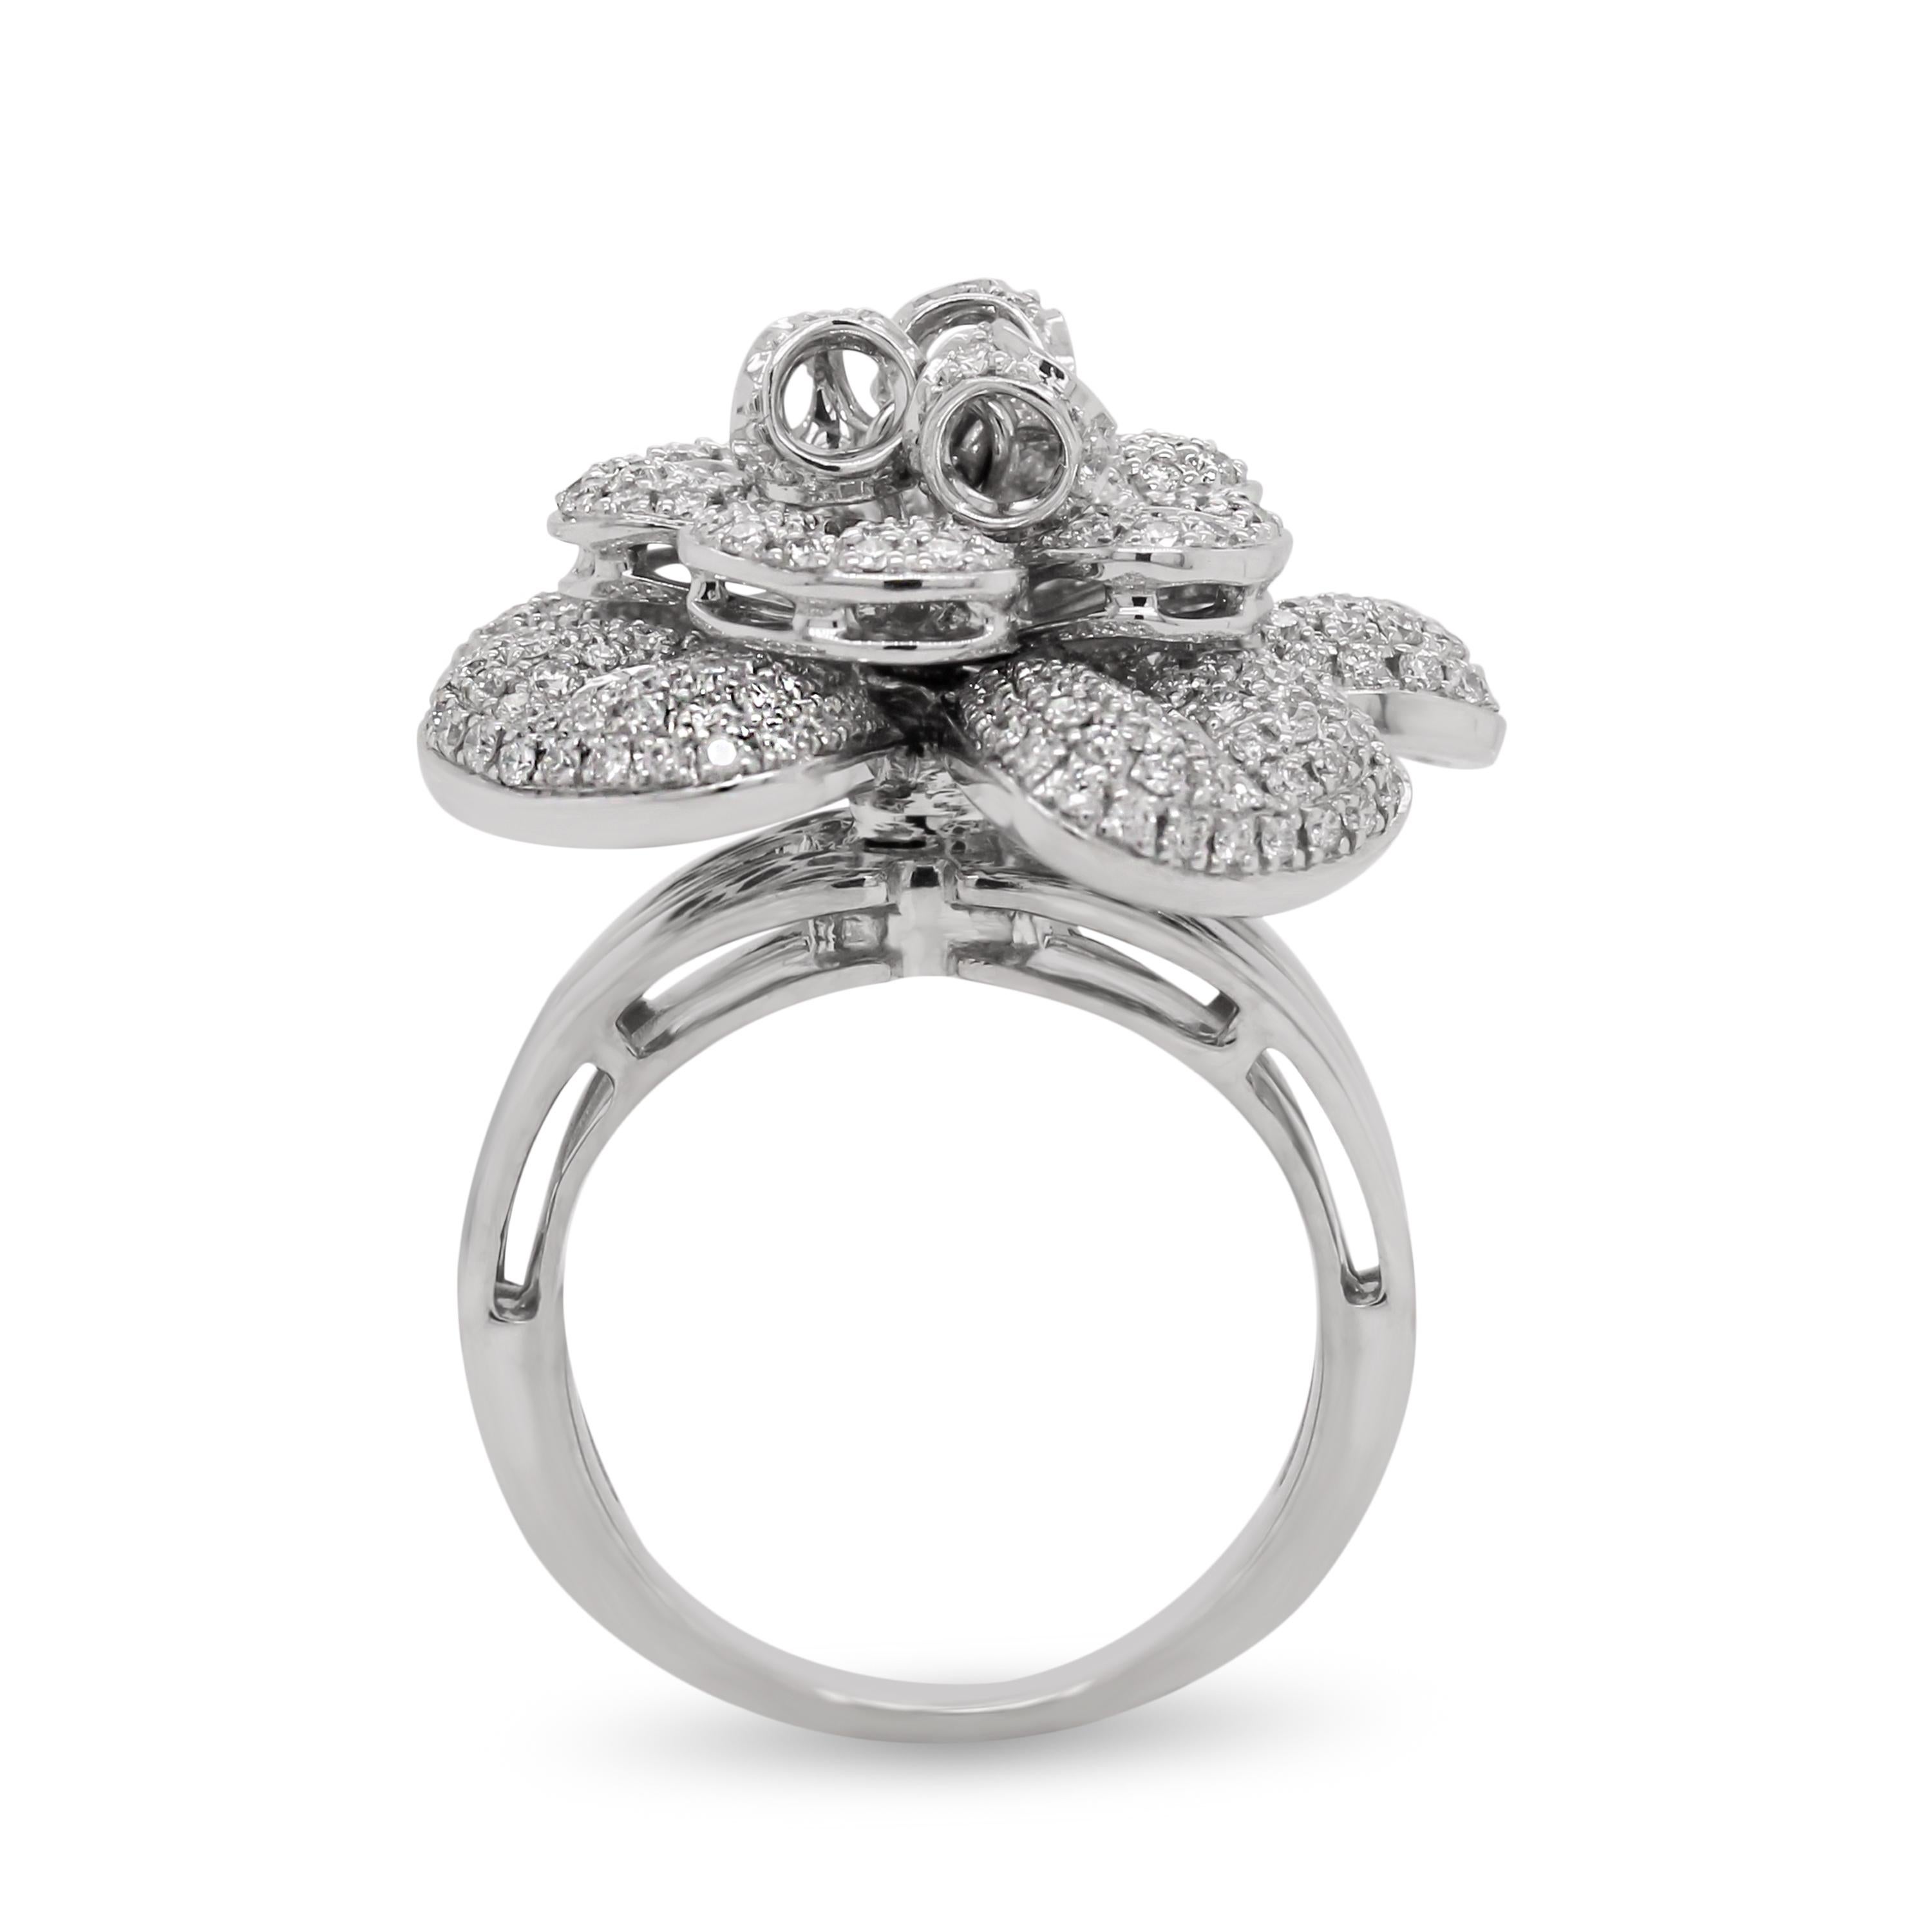 18 Karat White Gold 3 Carat Diamond Three Dimensional Flower Ring

This gorgeous ring features a 3D flower center encrusted with diamonds all throughout

Apprx. 3 carat, G-H color, VS-SI clarity diamonds total weight.

Ring face is 25mm. 4.5mm band